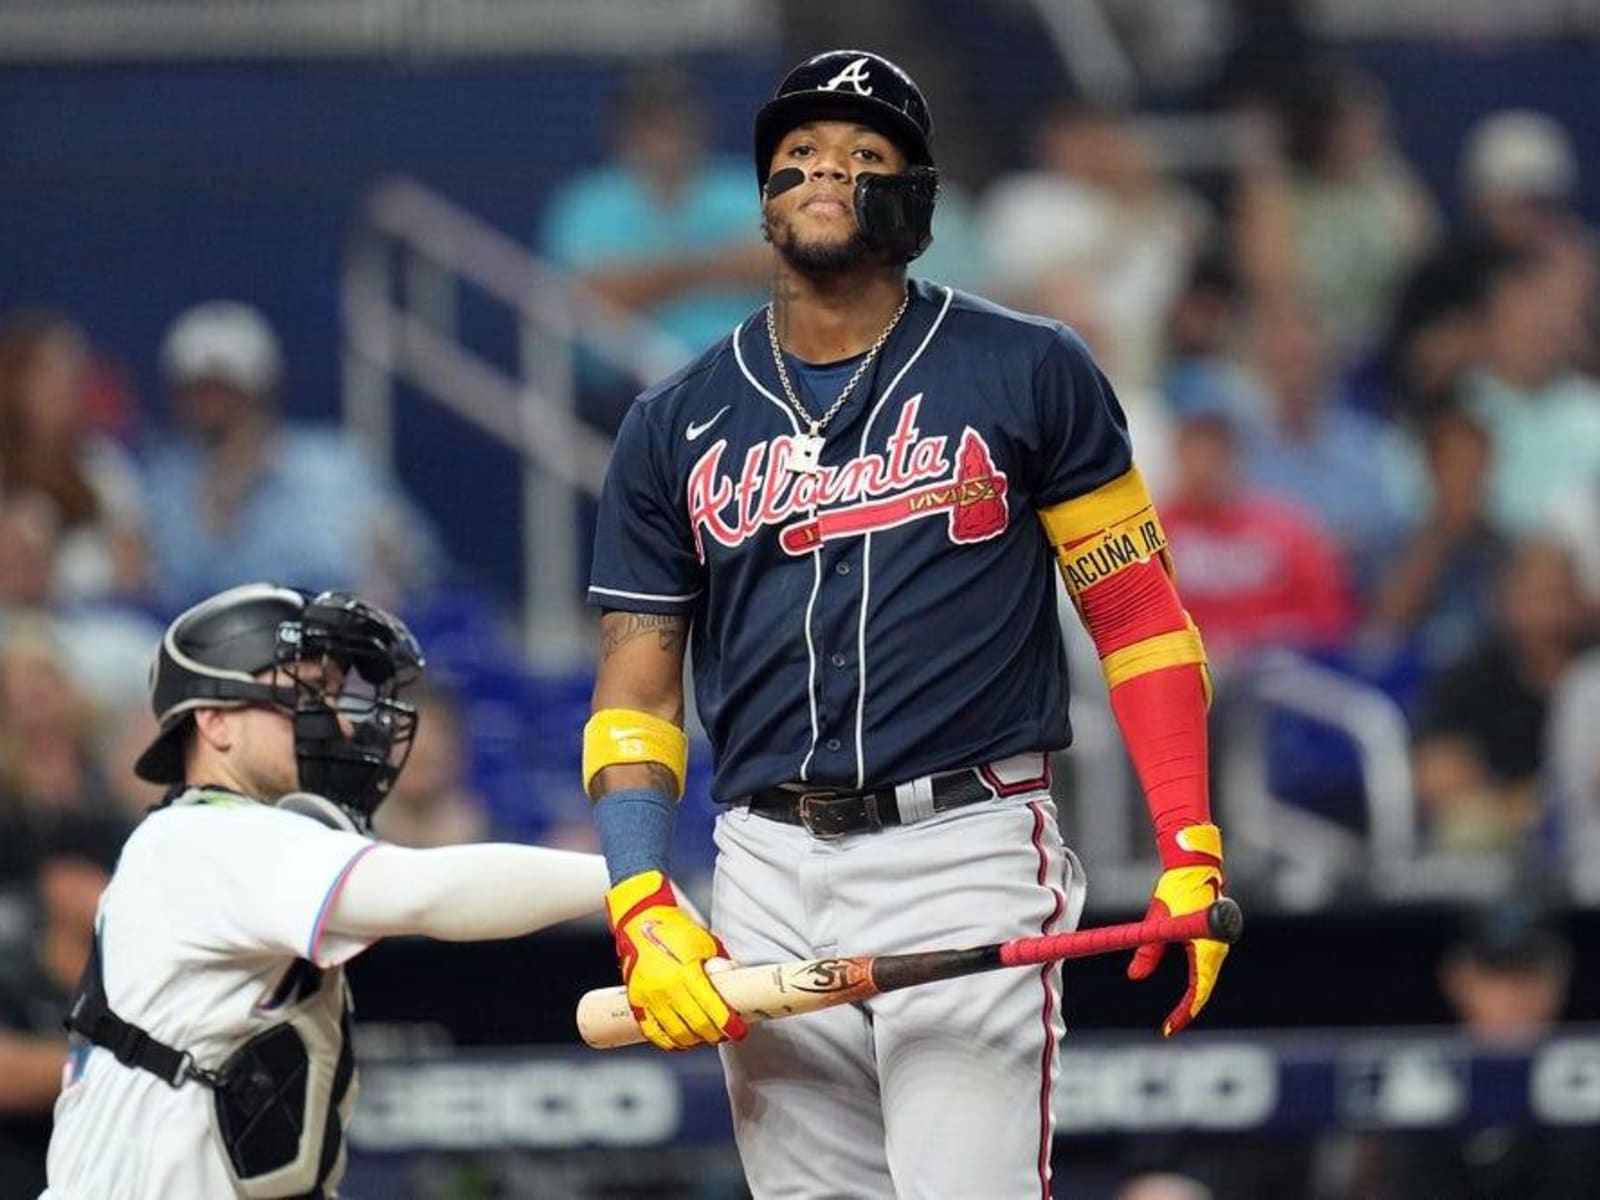 Braves notes: Ronald Acuña Jr.'s powers of recovery and Charlie